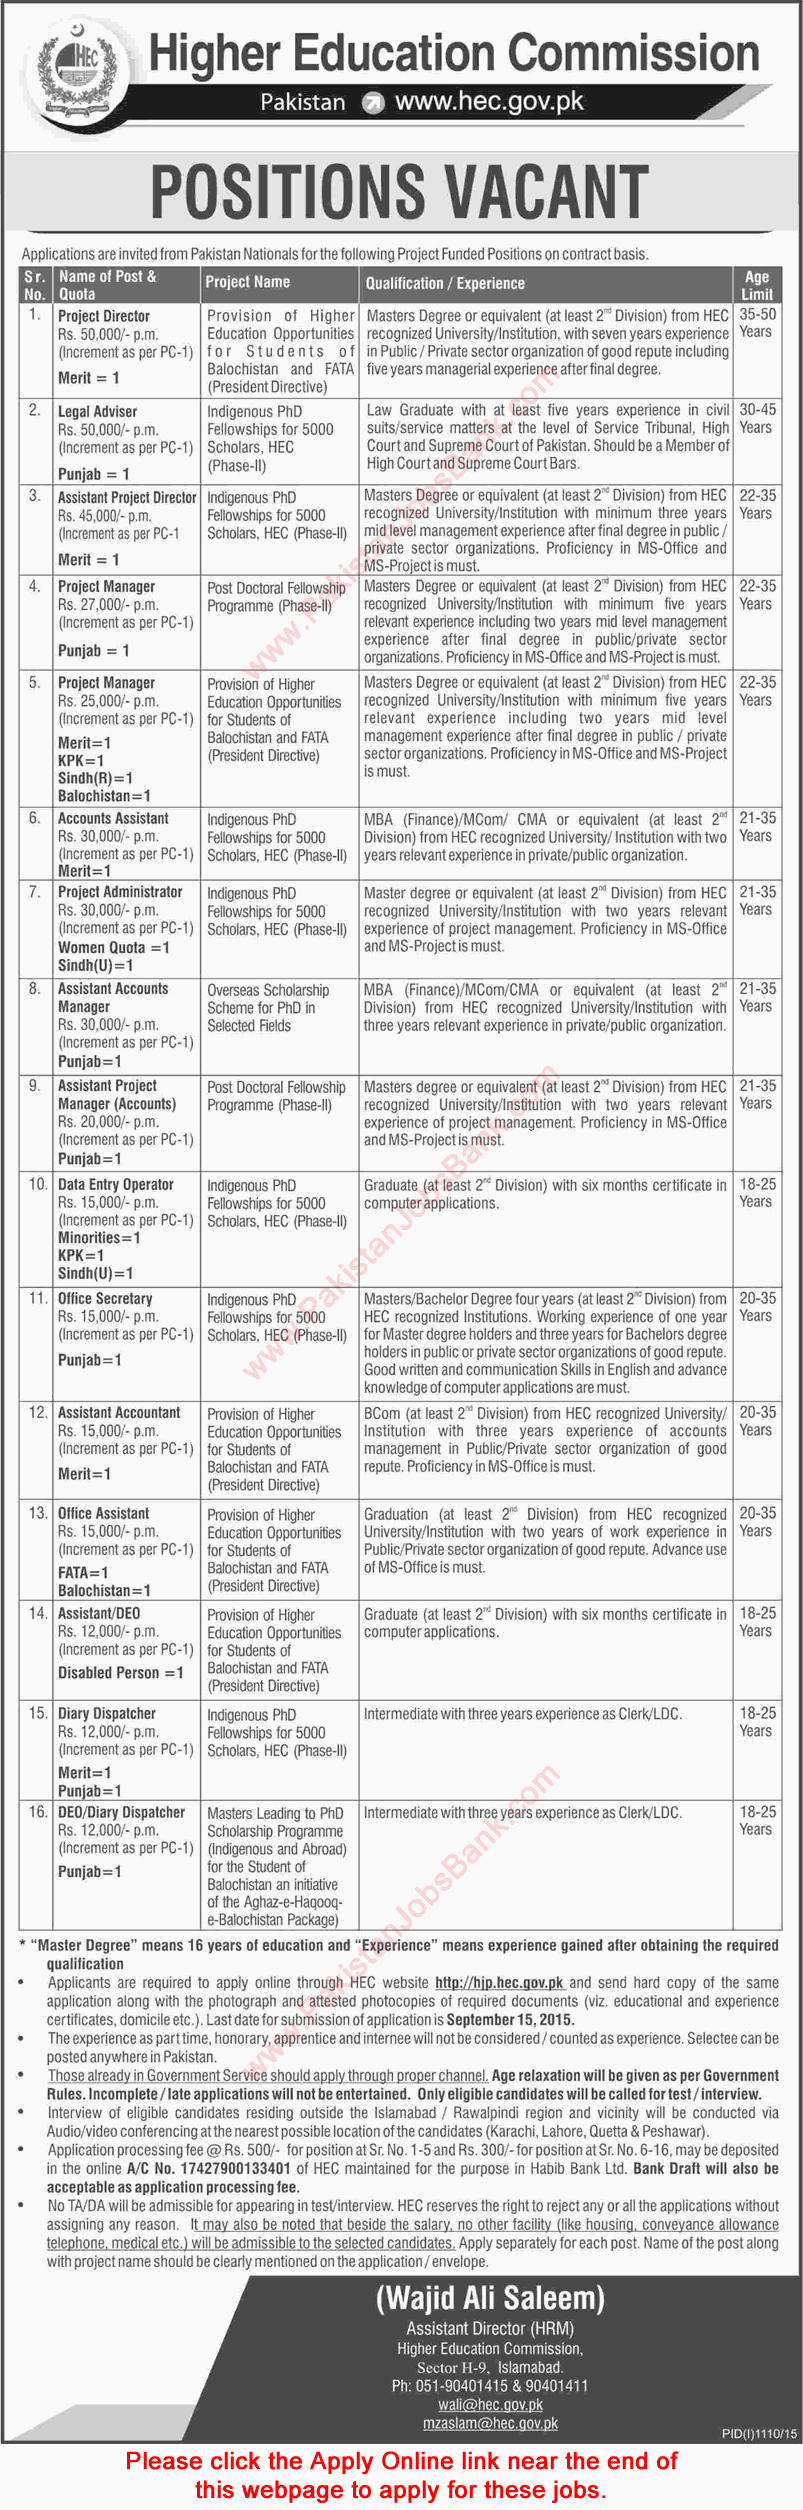 Higher Education Commission Jobs 2015 August / September Apply Online HEC Projects